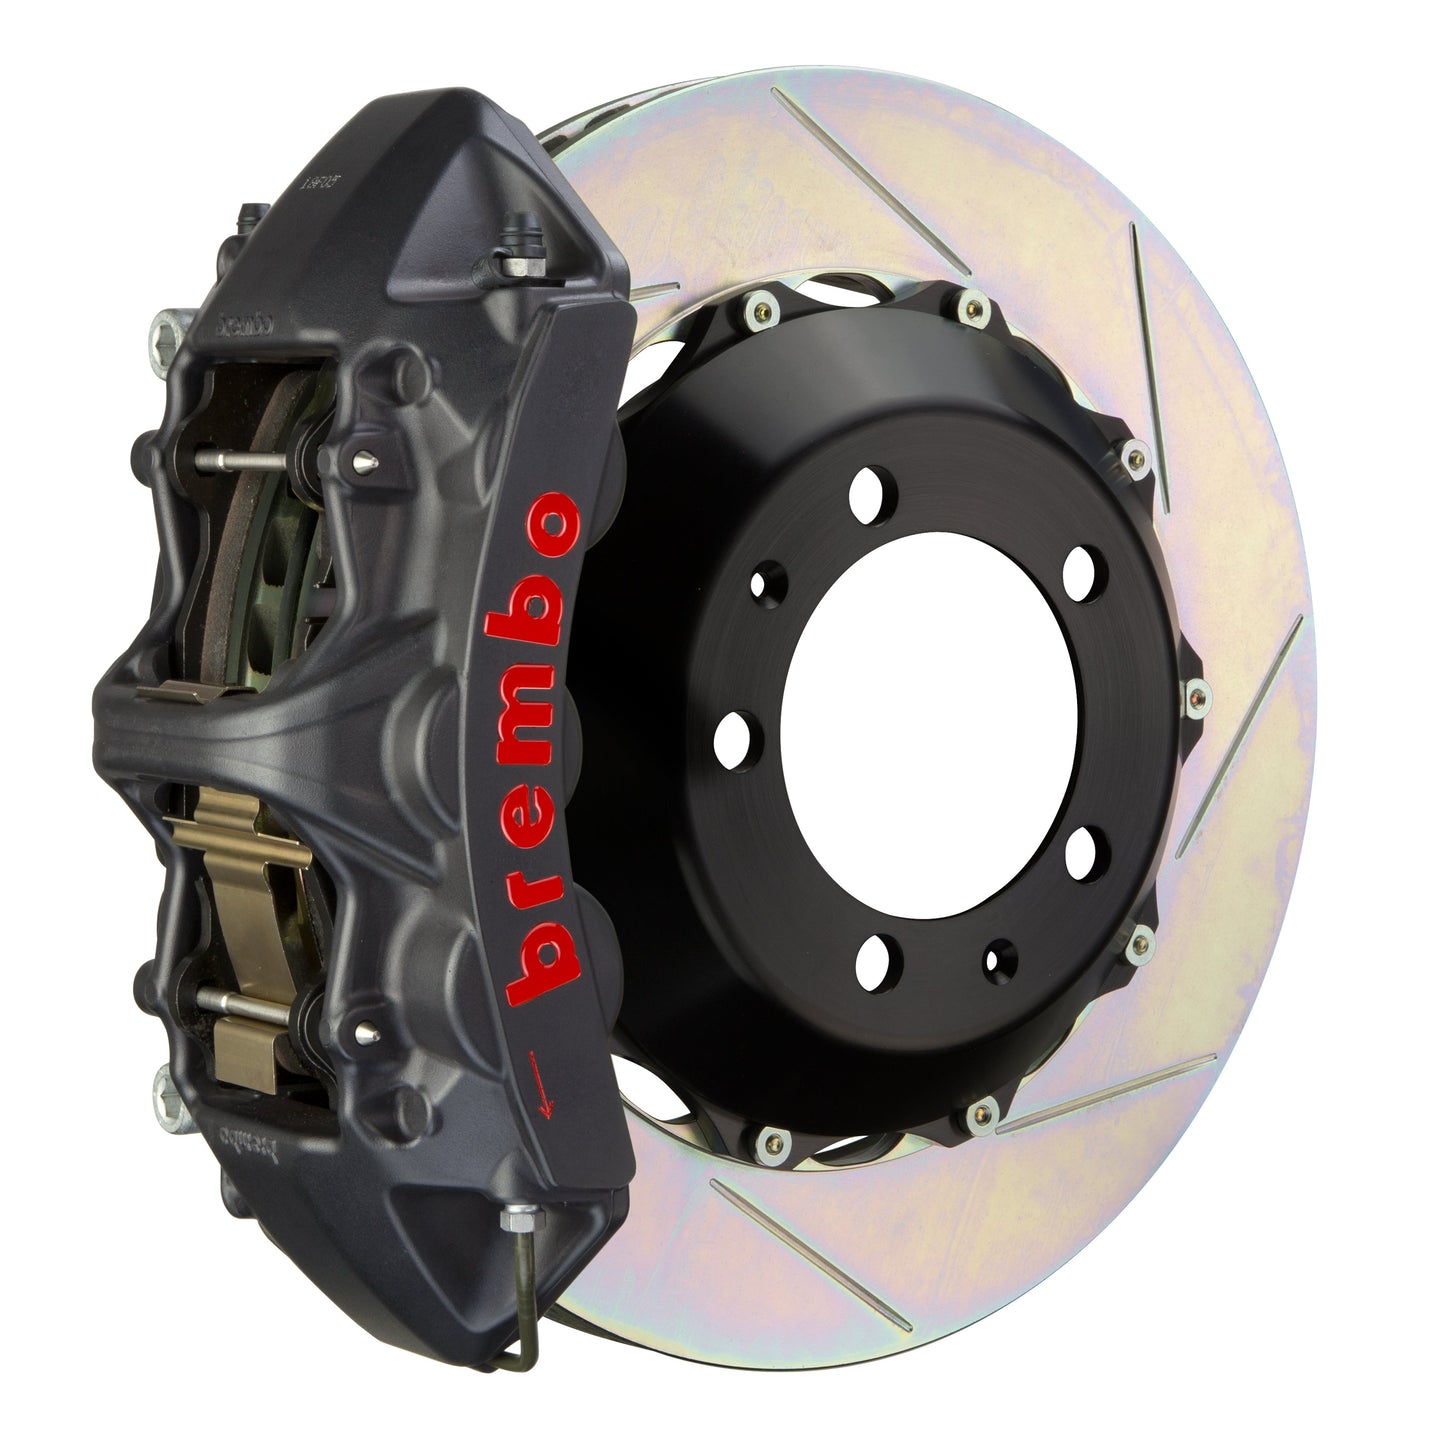 Front Brembo Gran Turismo Braking Upgrade Kit (1M19029AS) GT / S6 Caliper with 6-Pistons & 2-piece 380x32 Disc